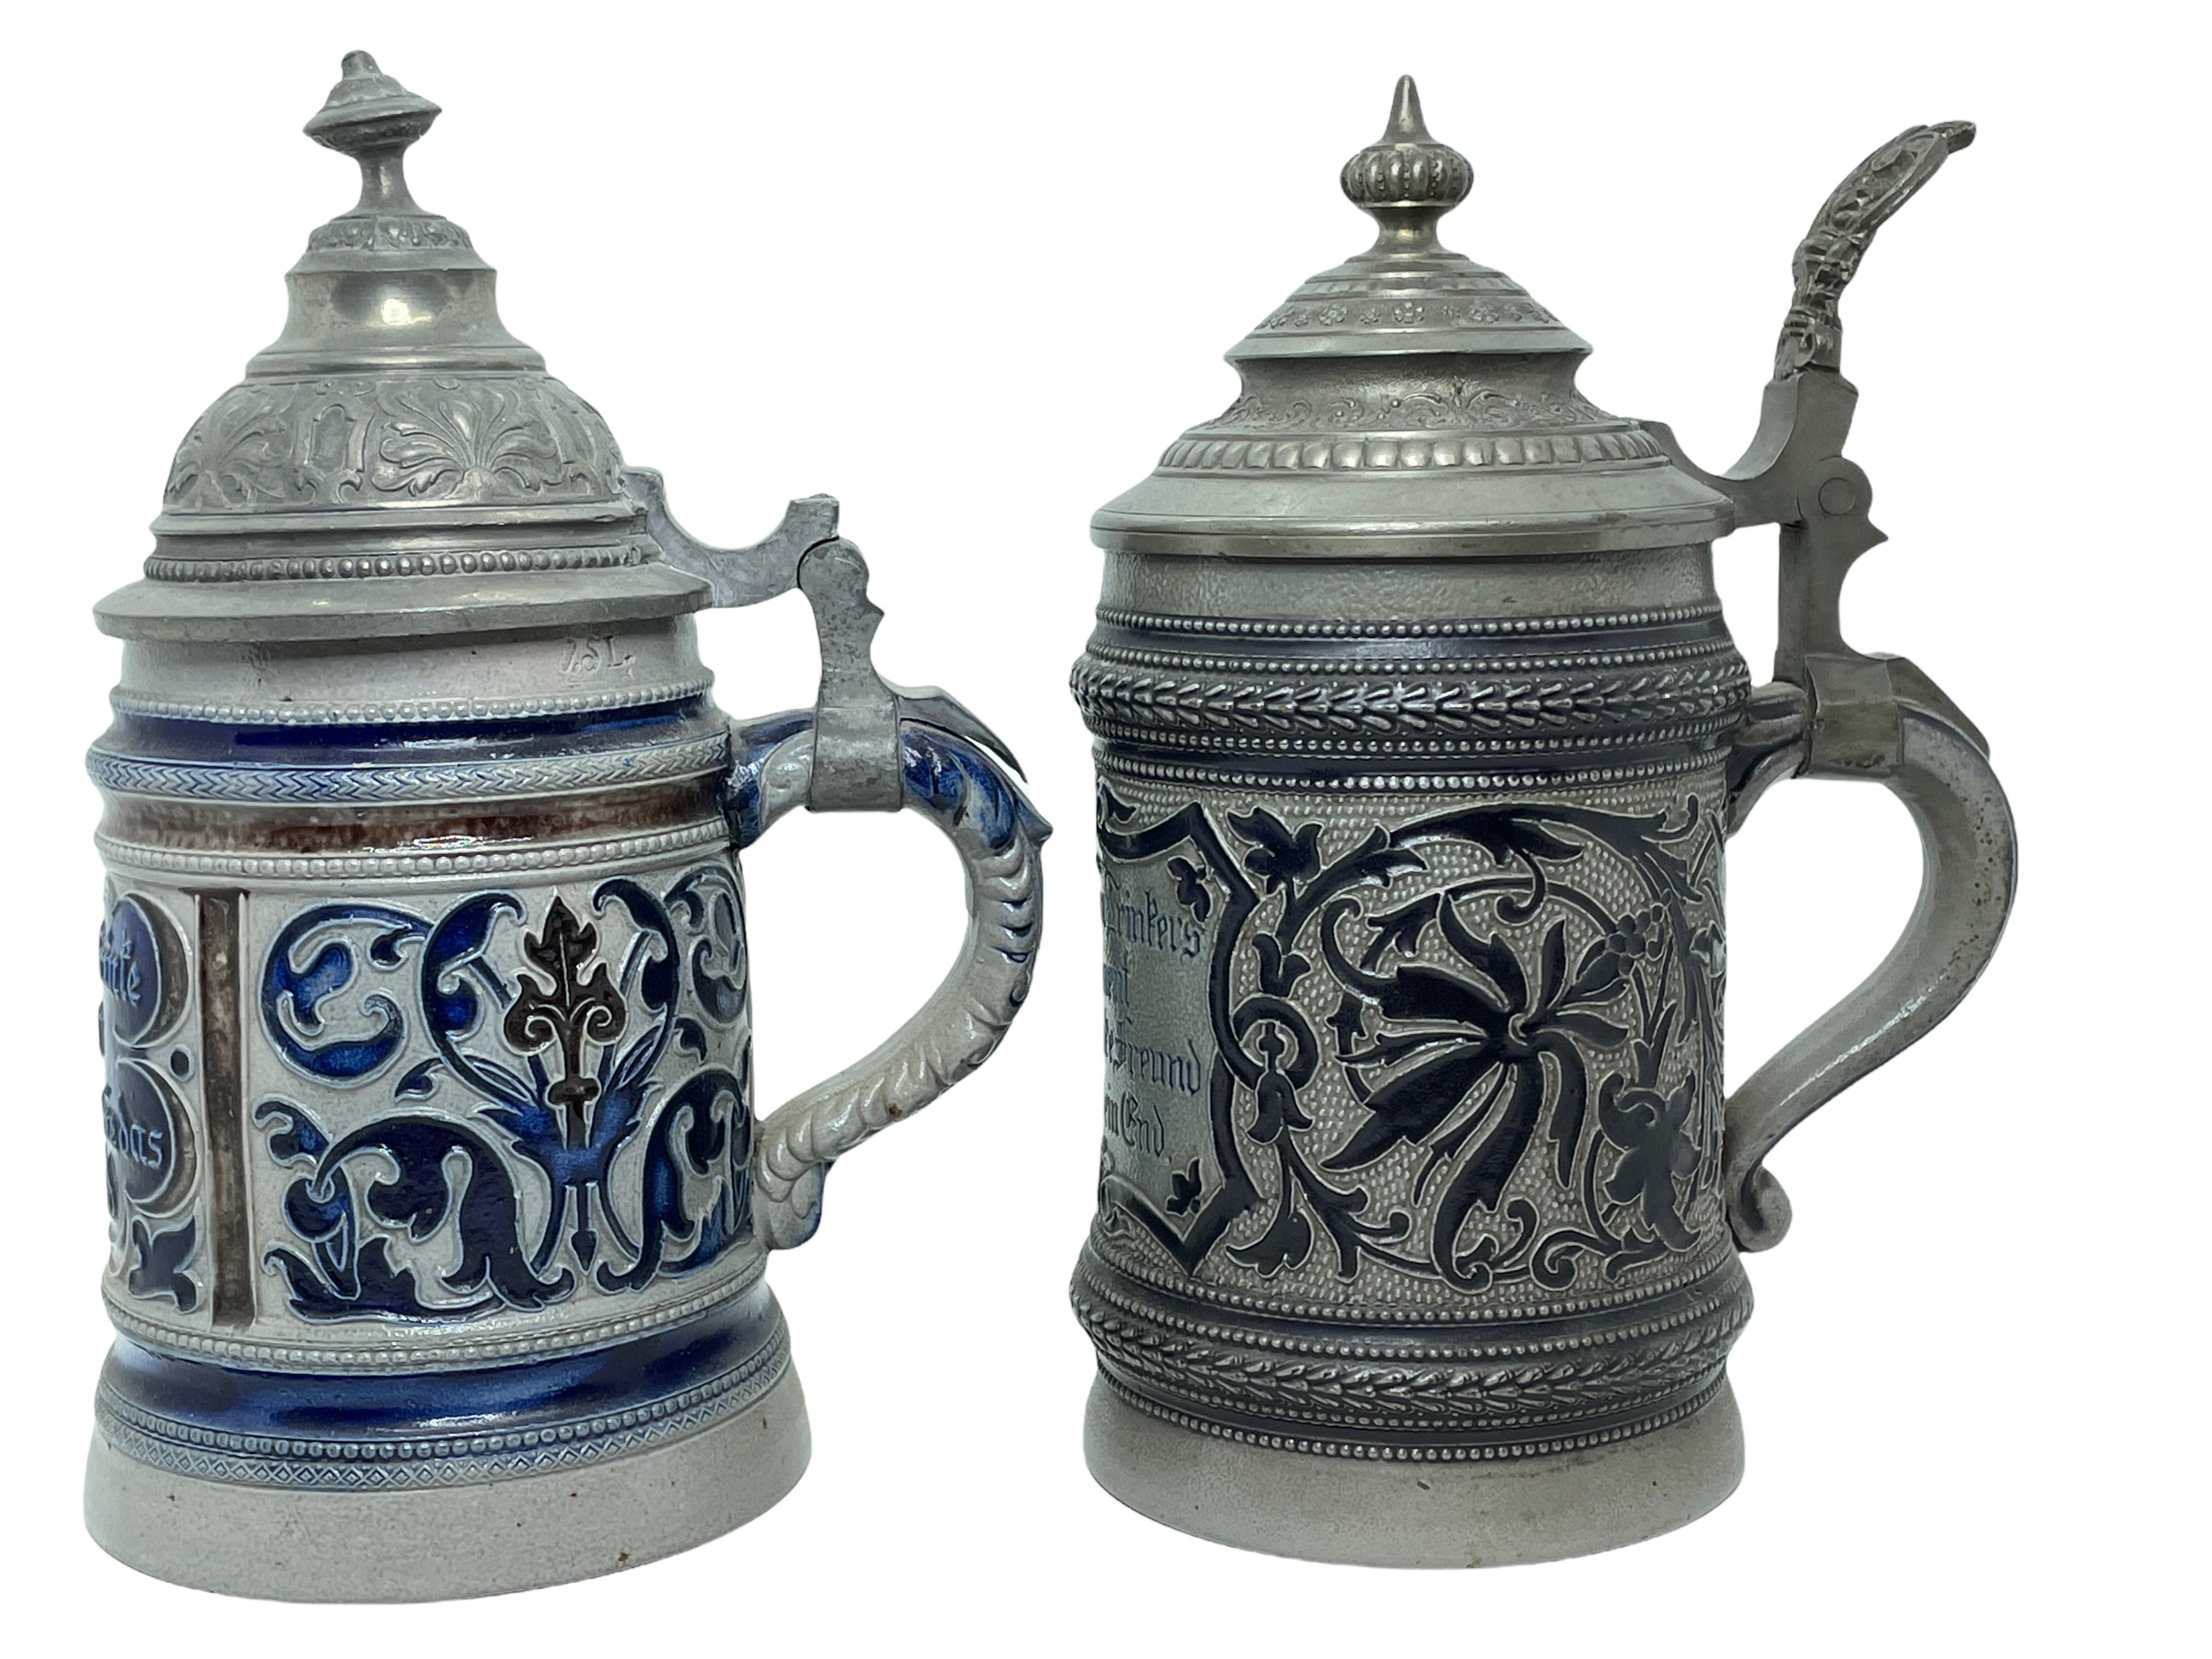 A set of two gorgeous beer stein, made in the Westerwald Area in Germany. These beer stein has been made in Germany, circa 1900s. Absolutely gorgeous pieces still in great used condition. Lid works properly, but is a little shaky. Each is a 1/2